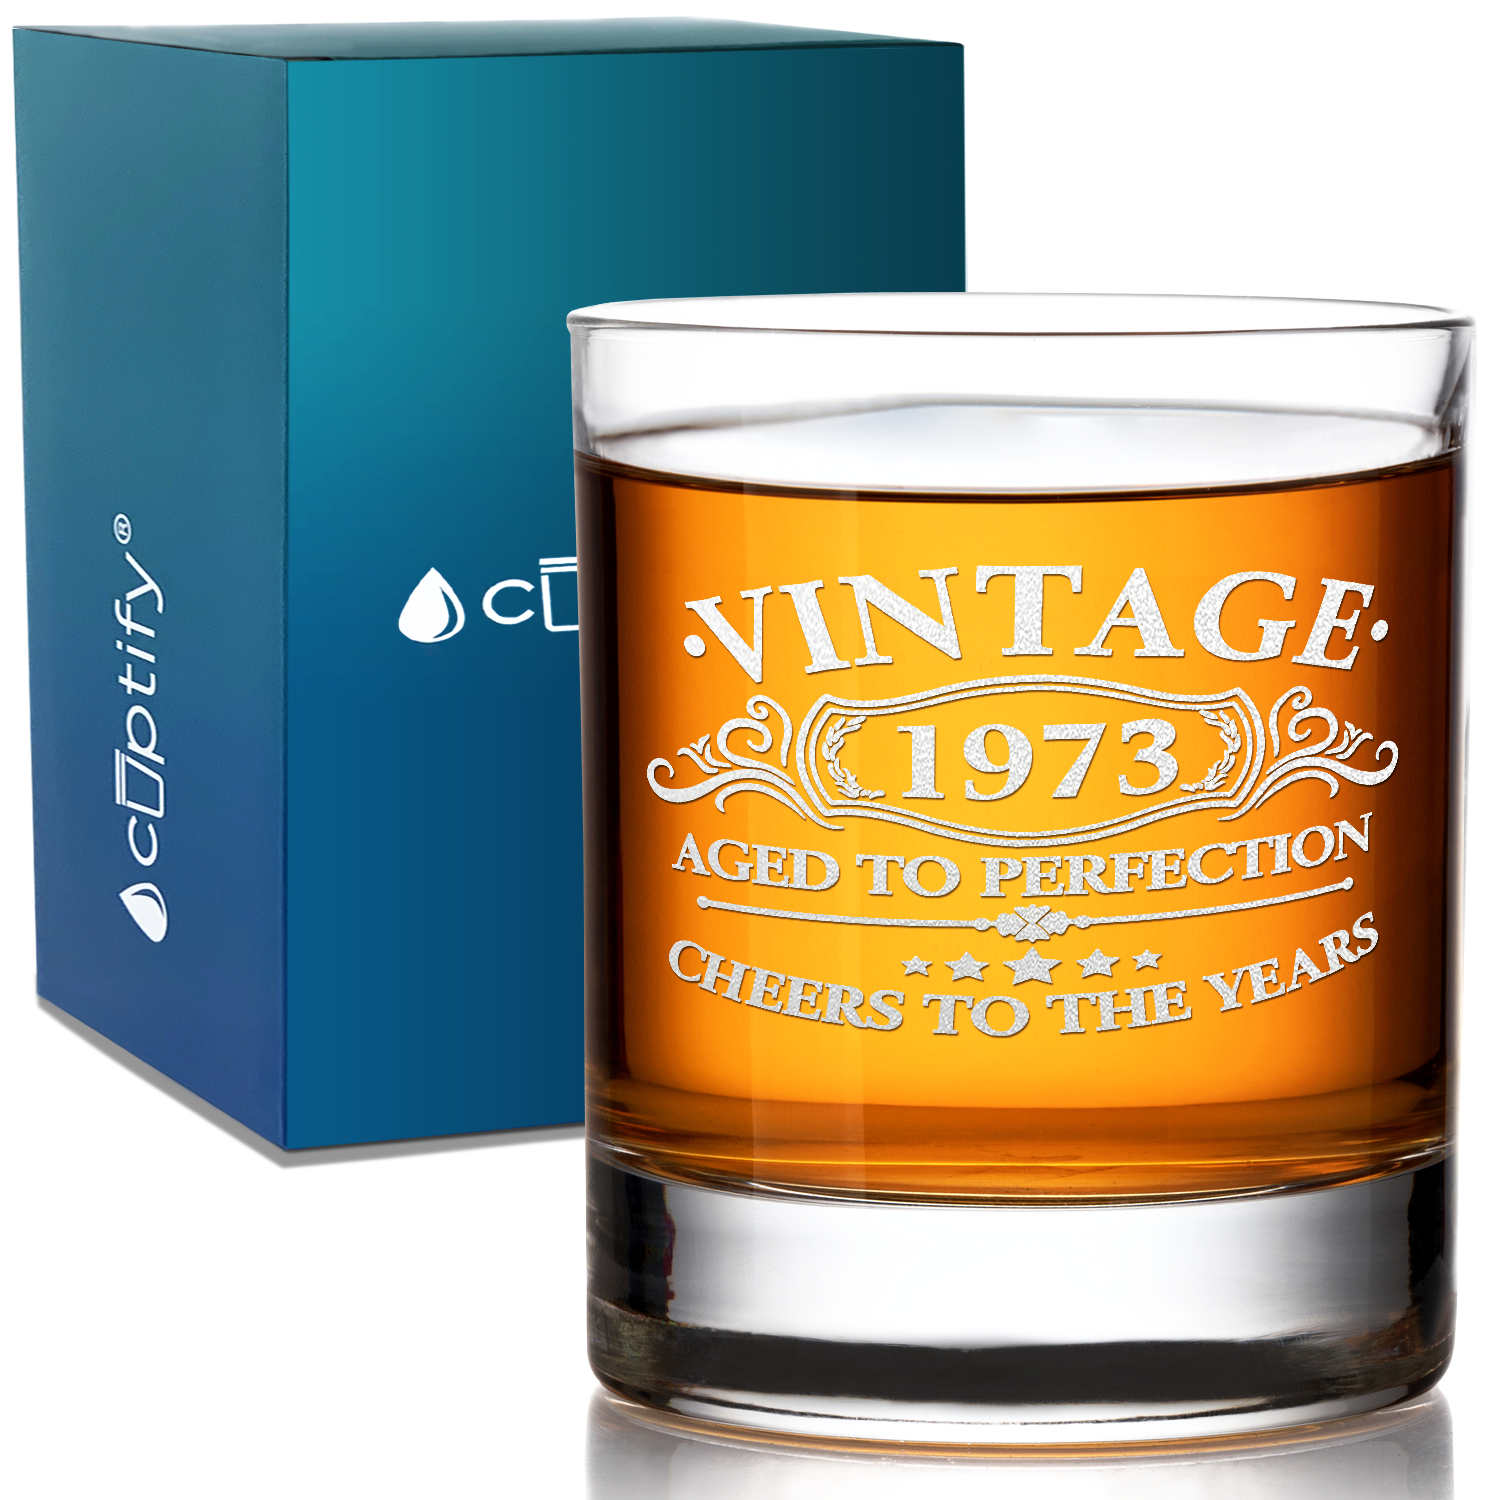 Vintage Aged To Perfection Cheers To 48 Years 1973 Laser Engraved on 10.25oz Old Fashion Glass